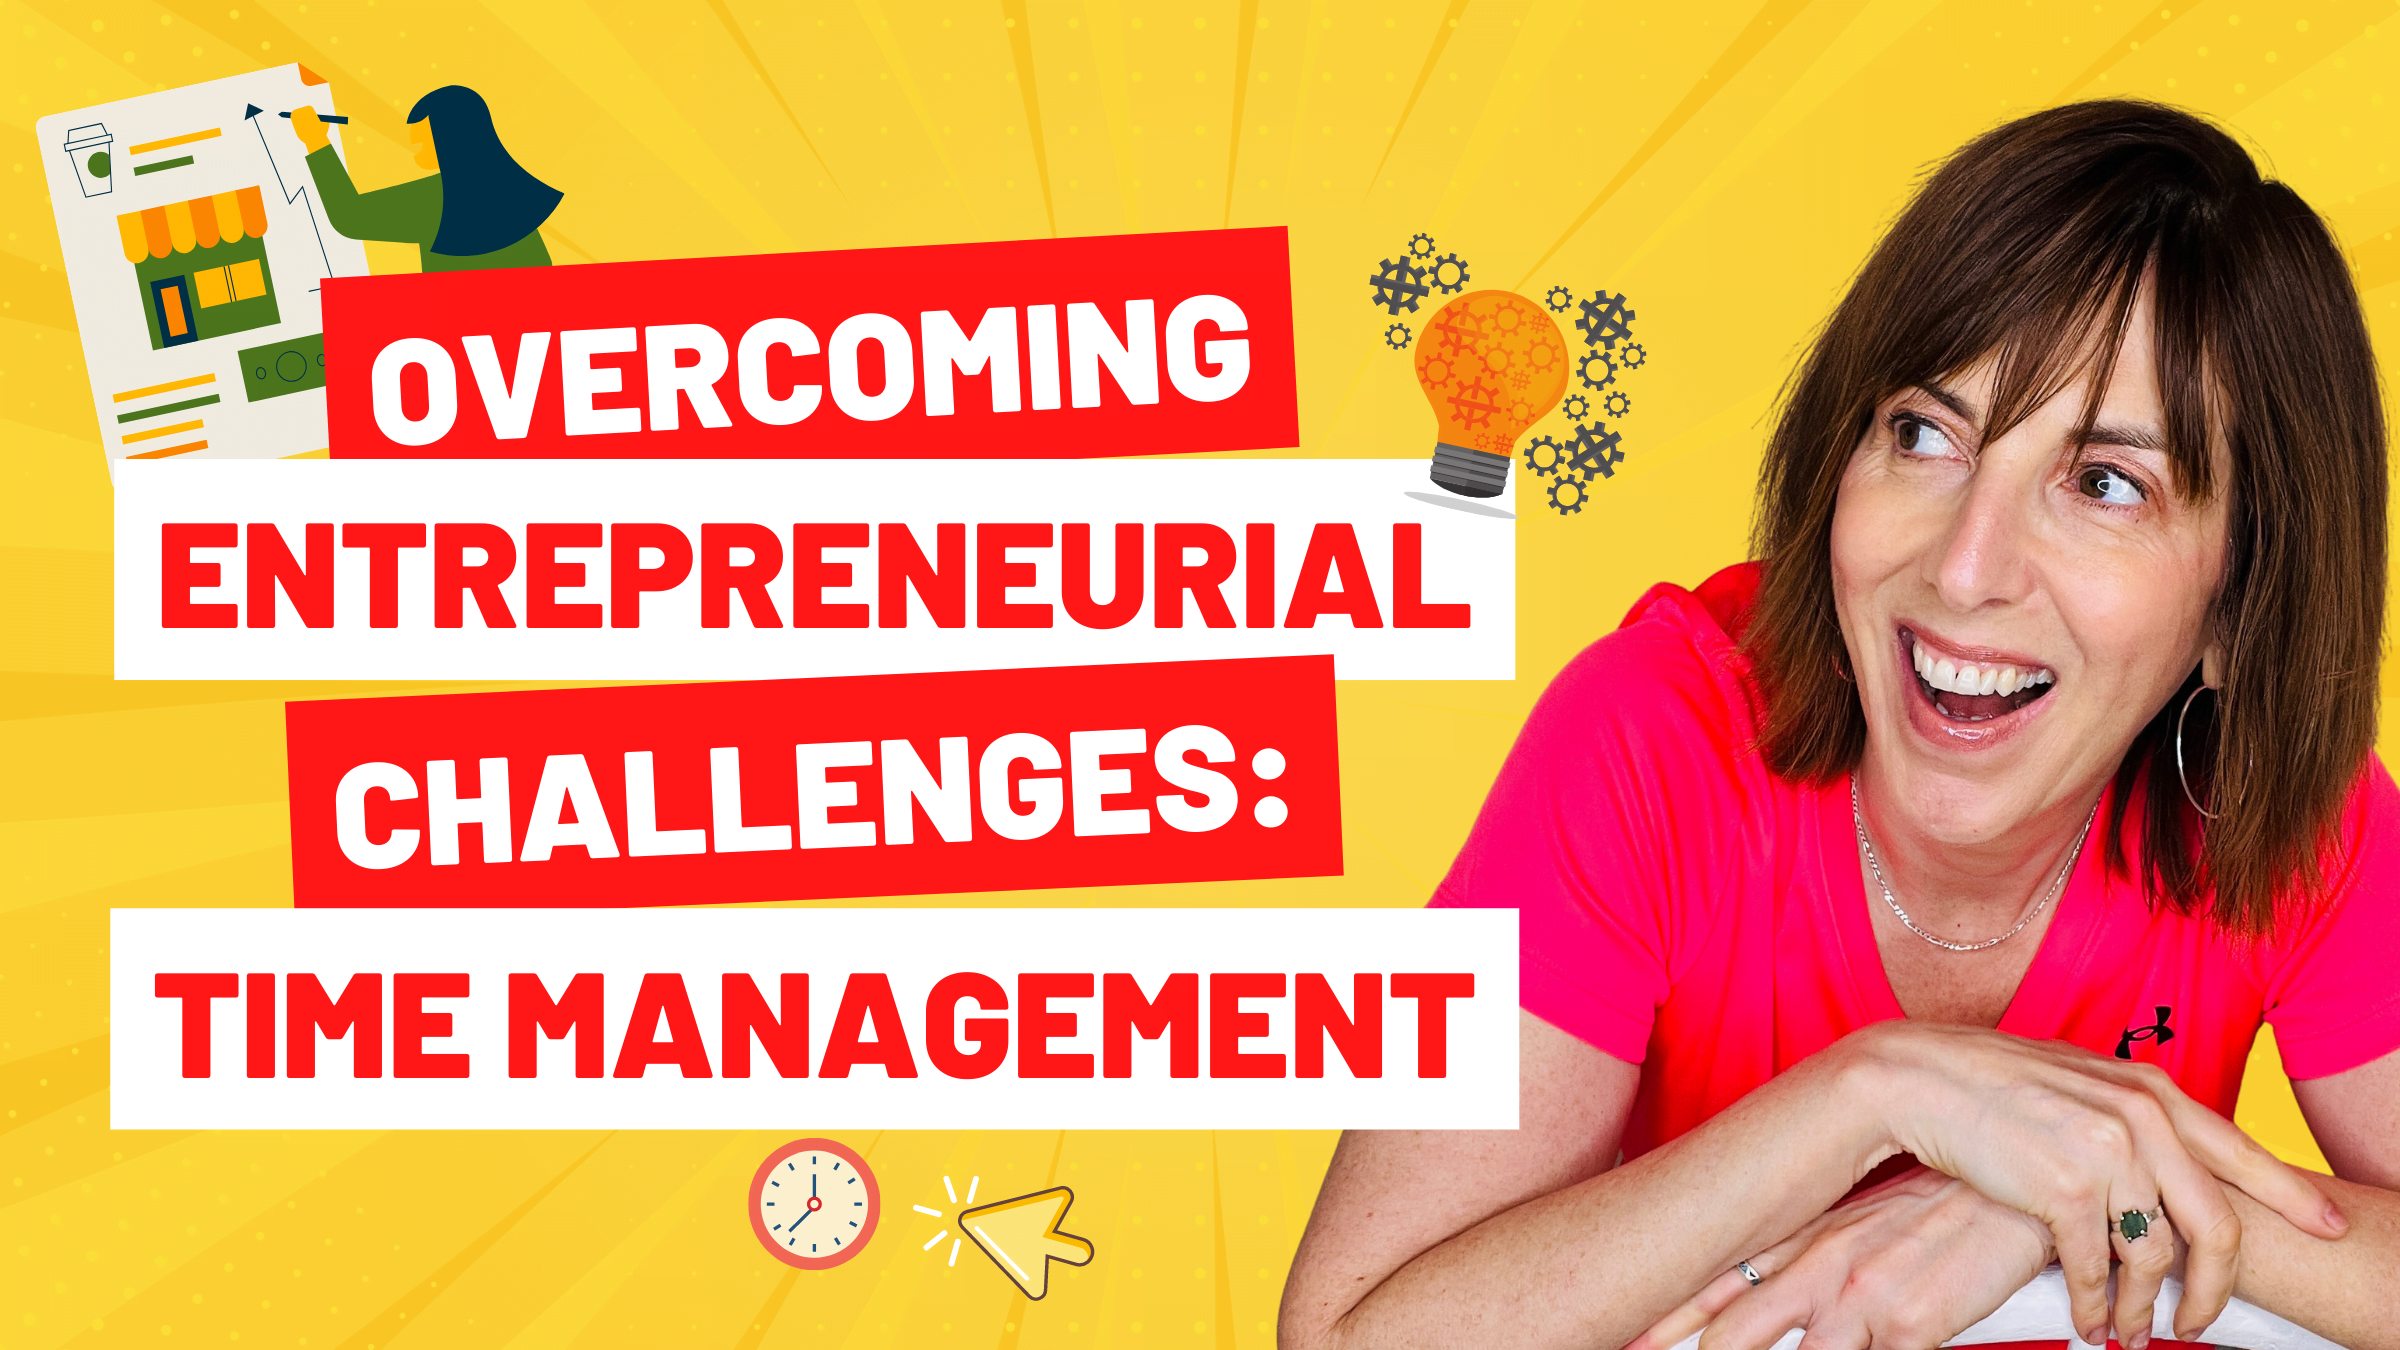 Overcoming Entrepreneurial Challenges: Time Management